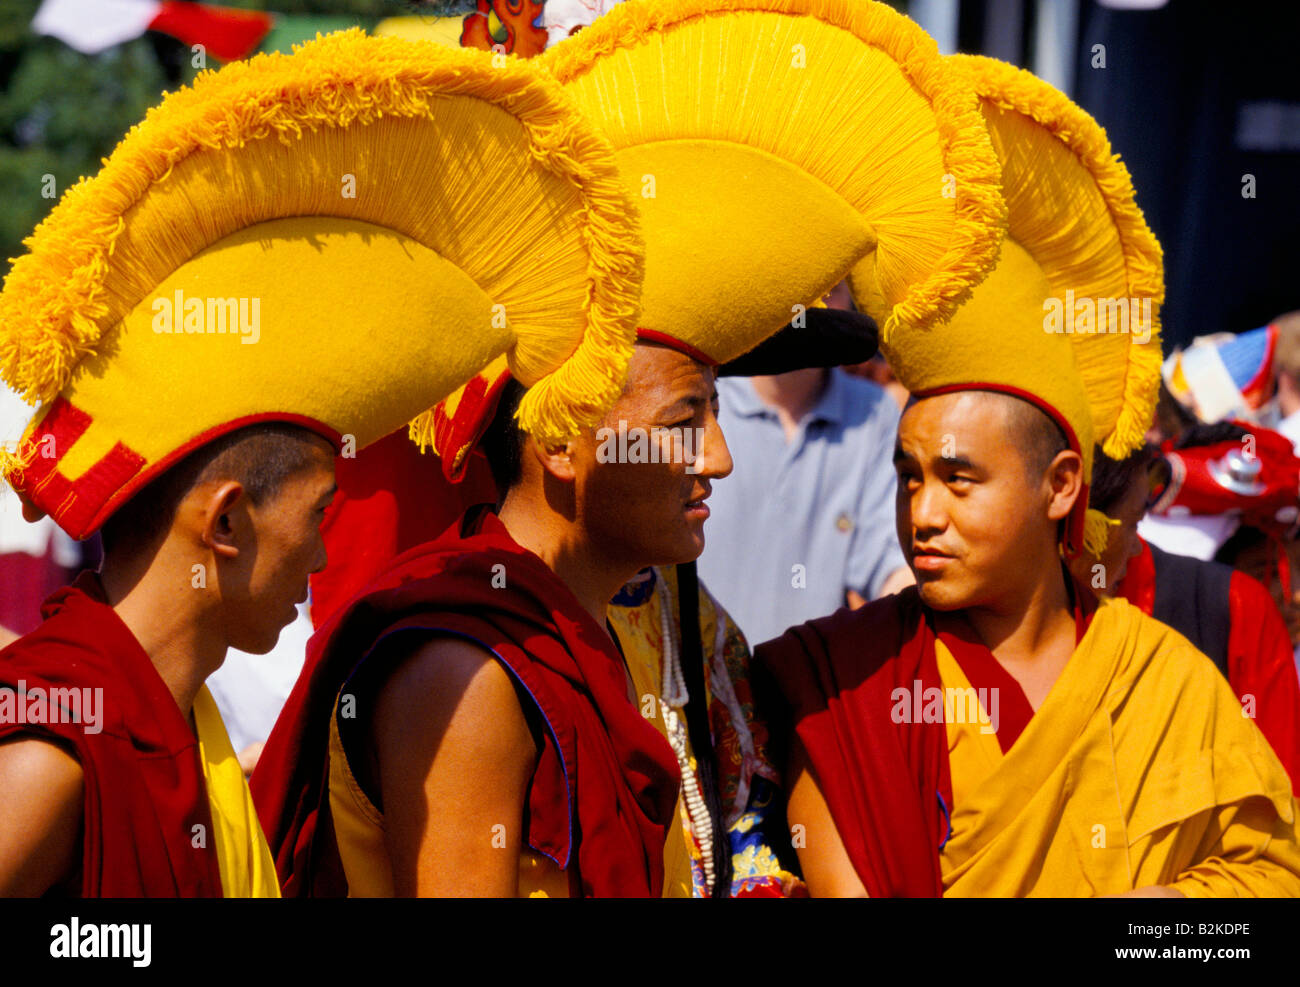 TIBETAN BUDDhIST MONKS WEARING TRADITIONAL MAROON ROBES FRINGED YELLOW HATS AT CONCERT FOR TIBET Stock Photo